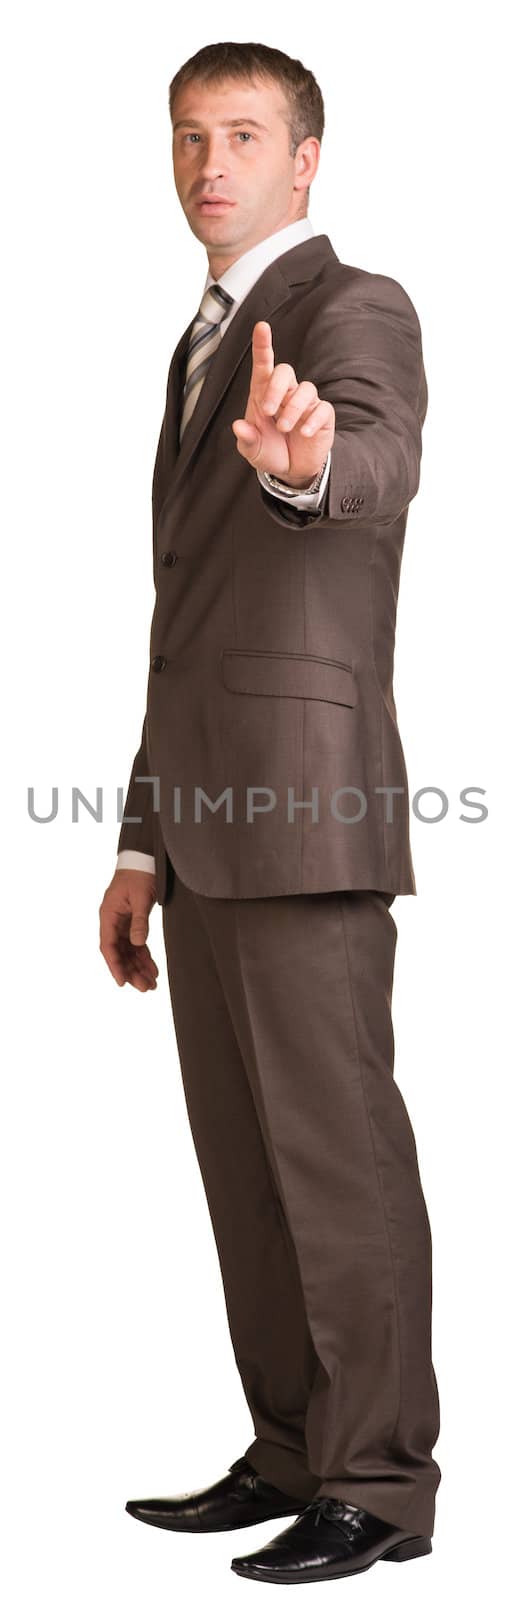 Businessman holding hand up in front of him. Isolated on white background.